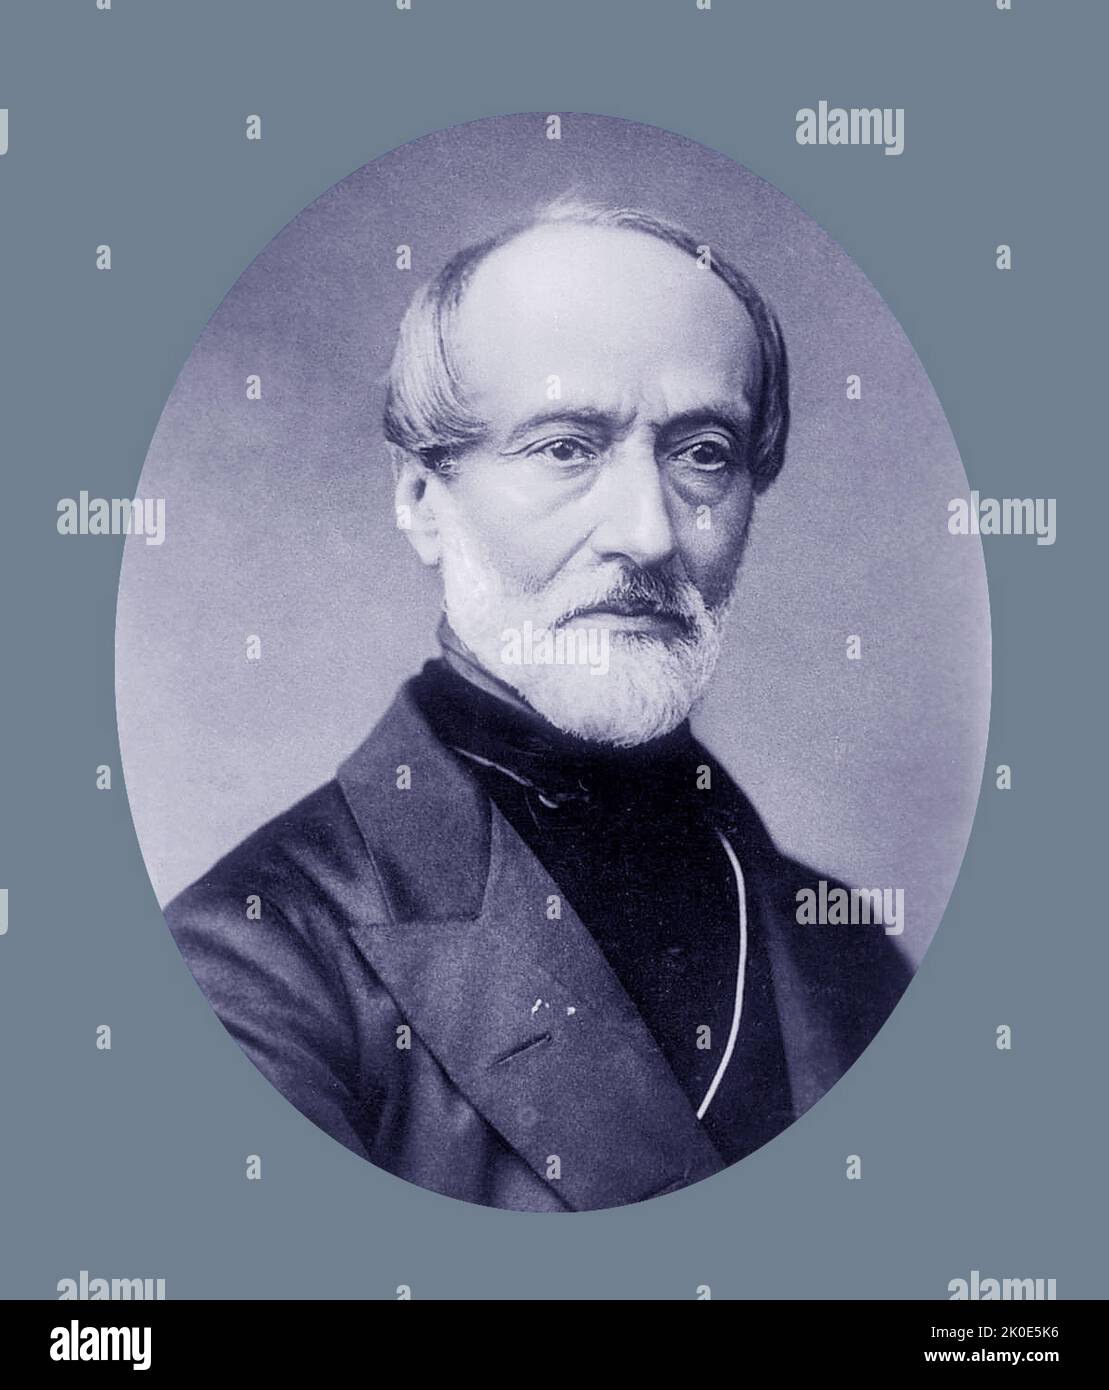 Giuseppe Mazzini (1805 - 1872) Italian politician, journalist, and activist for the unification of Italy and spearhead of the Italian revolutionary movement. His efforts helped bring about the independent and unified Italy in place of the several separate states. Stock Photo